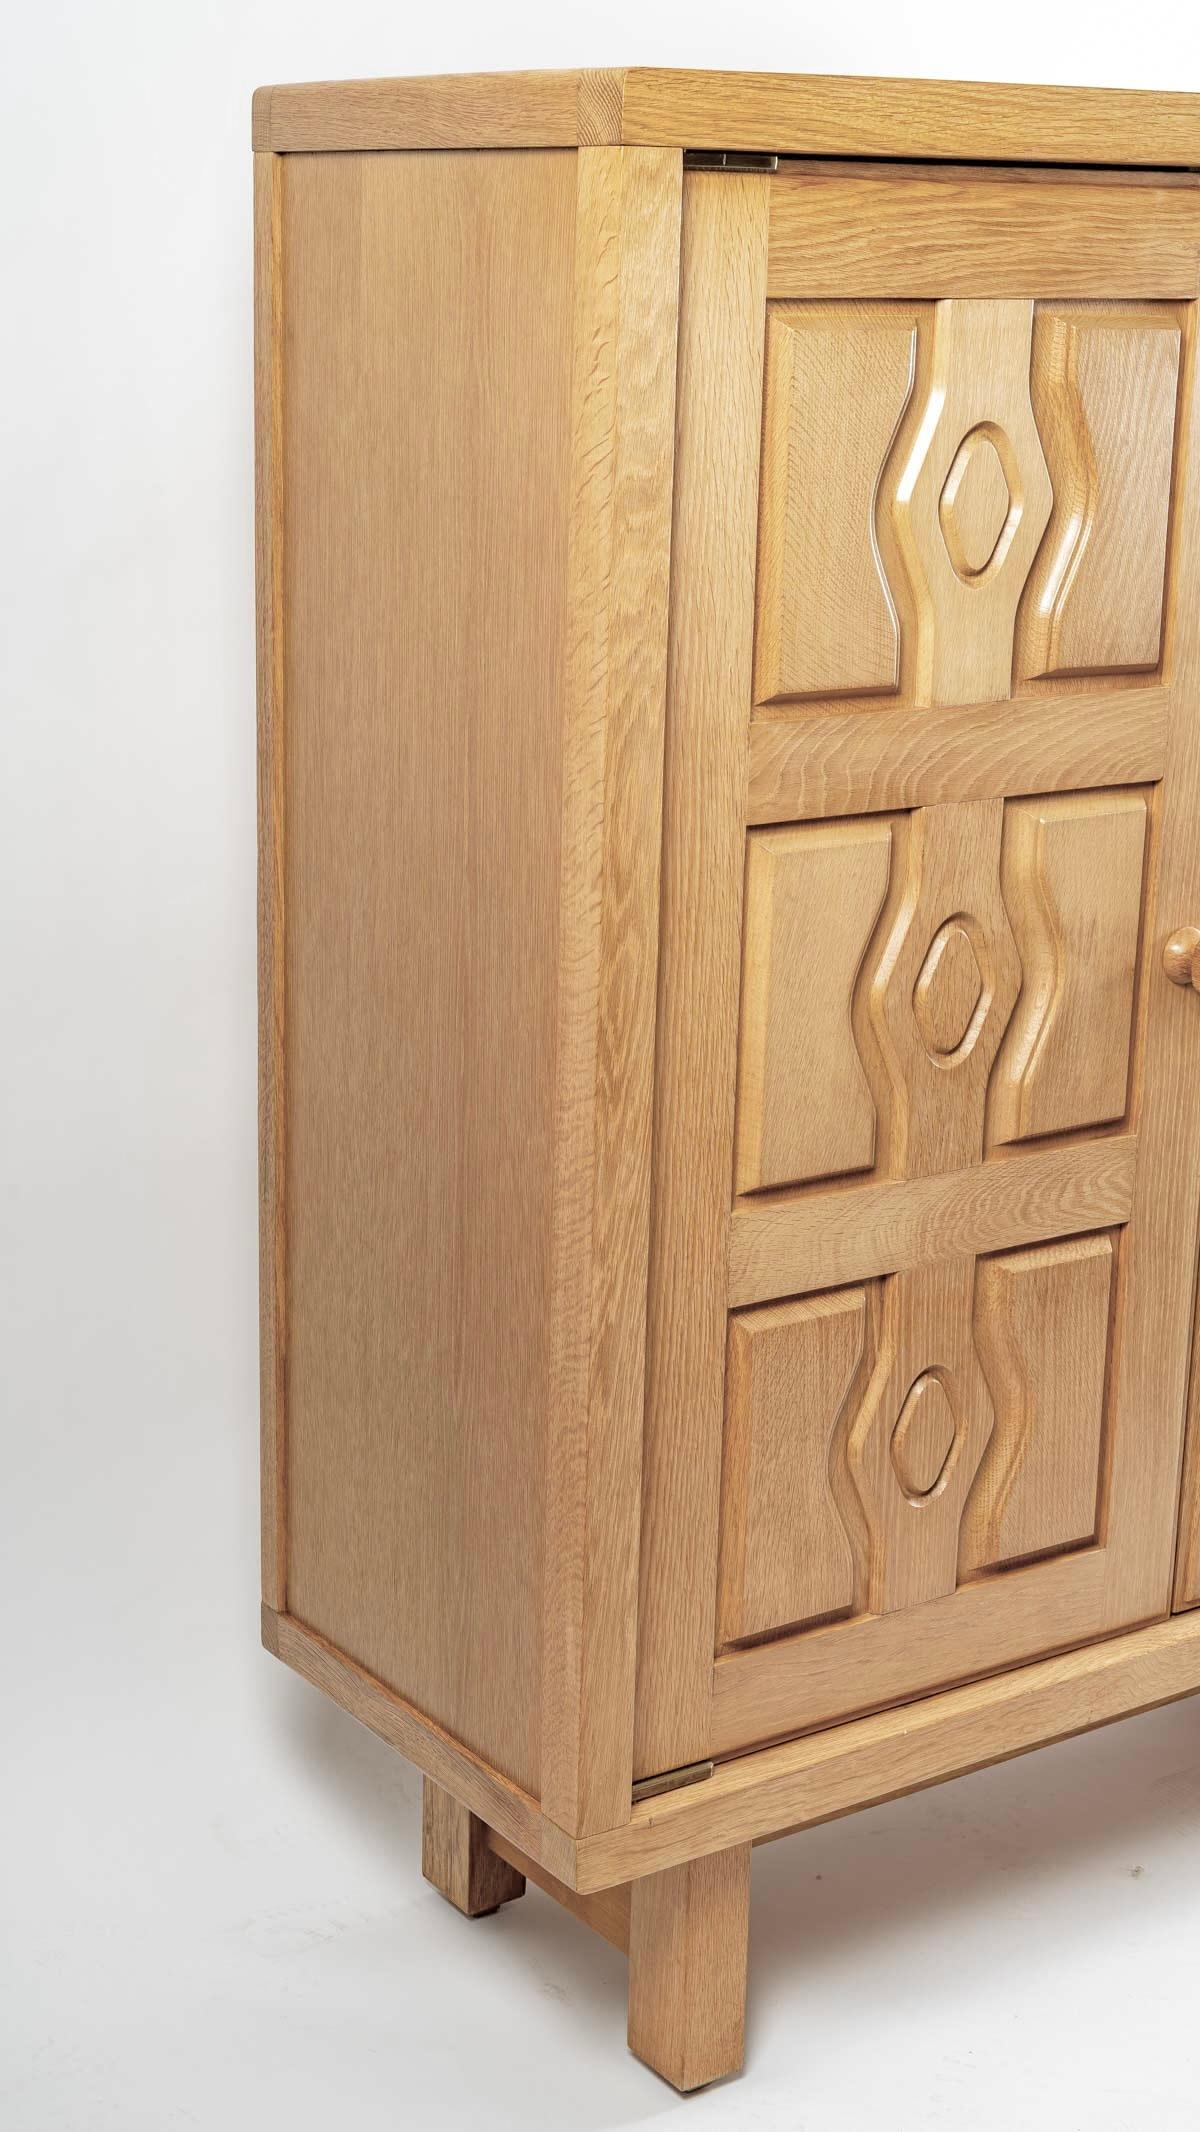 Solid oak cabinet by Guillerme and Chambron from the 1950s.

The four square-section legs support a large storage cabinet with two opening doors adorned with geometric patterns and ball handles with an ingenious locking system typical of Guillerme